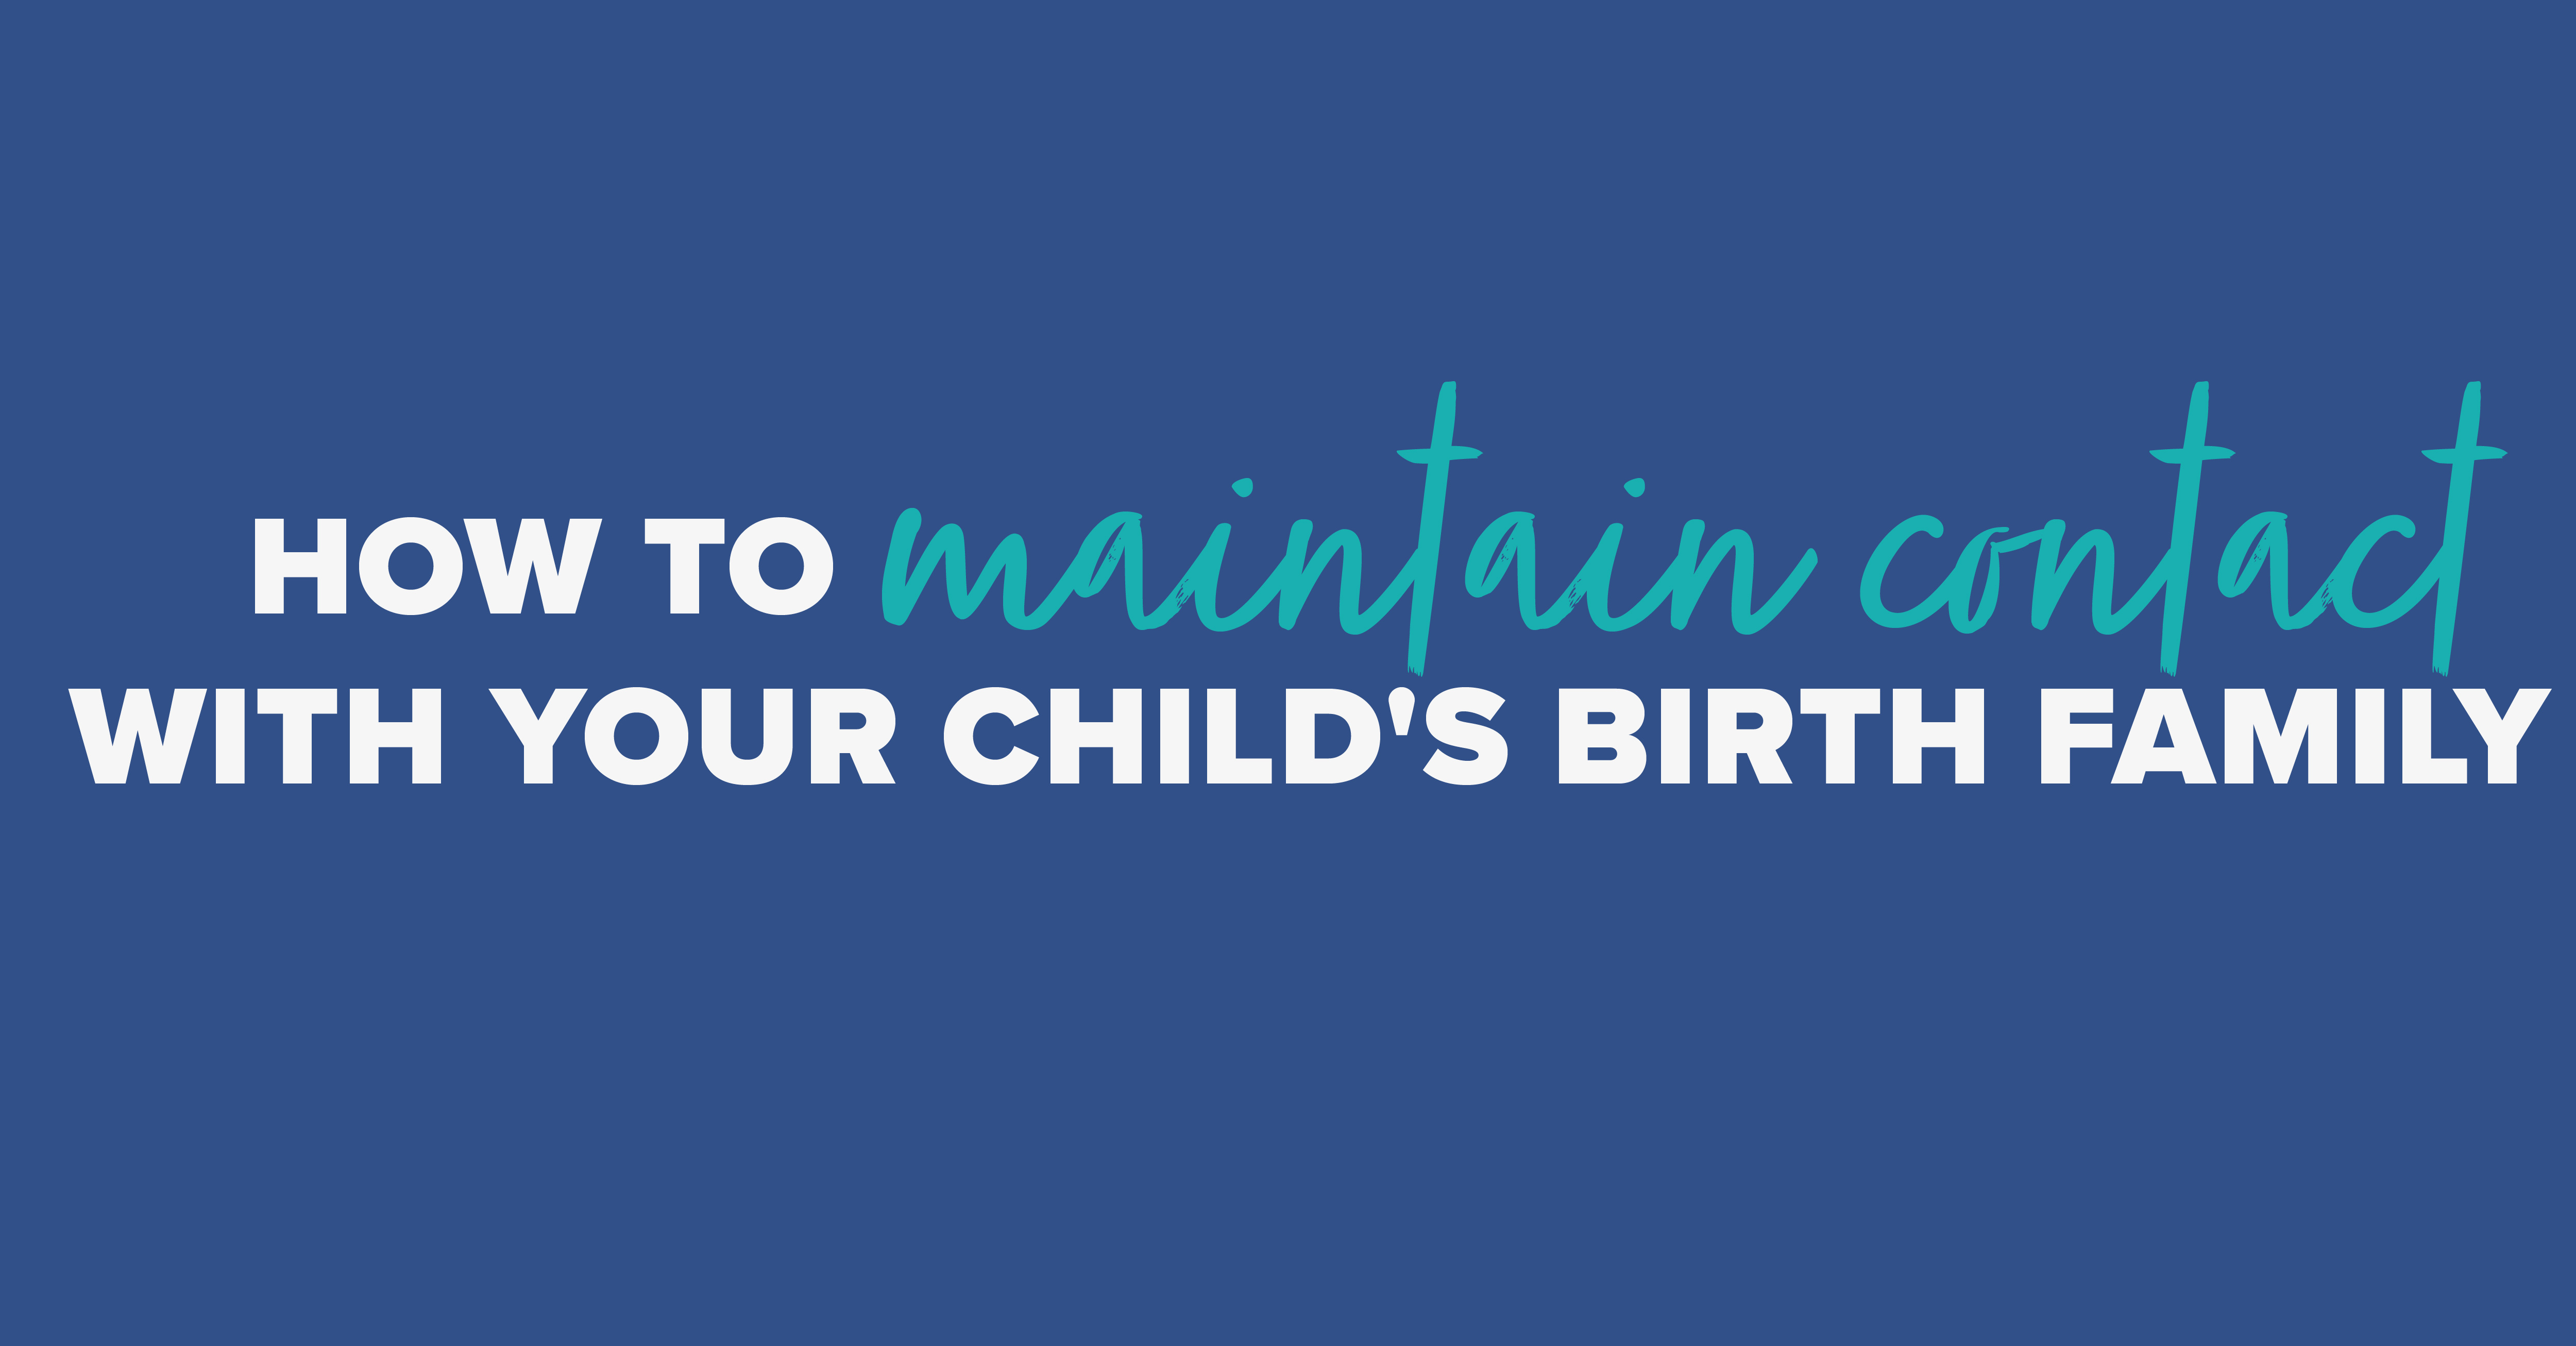 How to Maintain Contact With Your Child's Birth Family